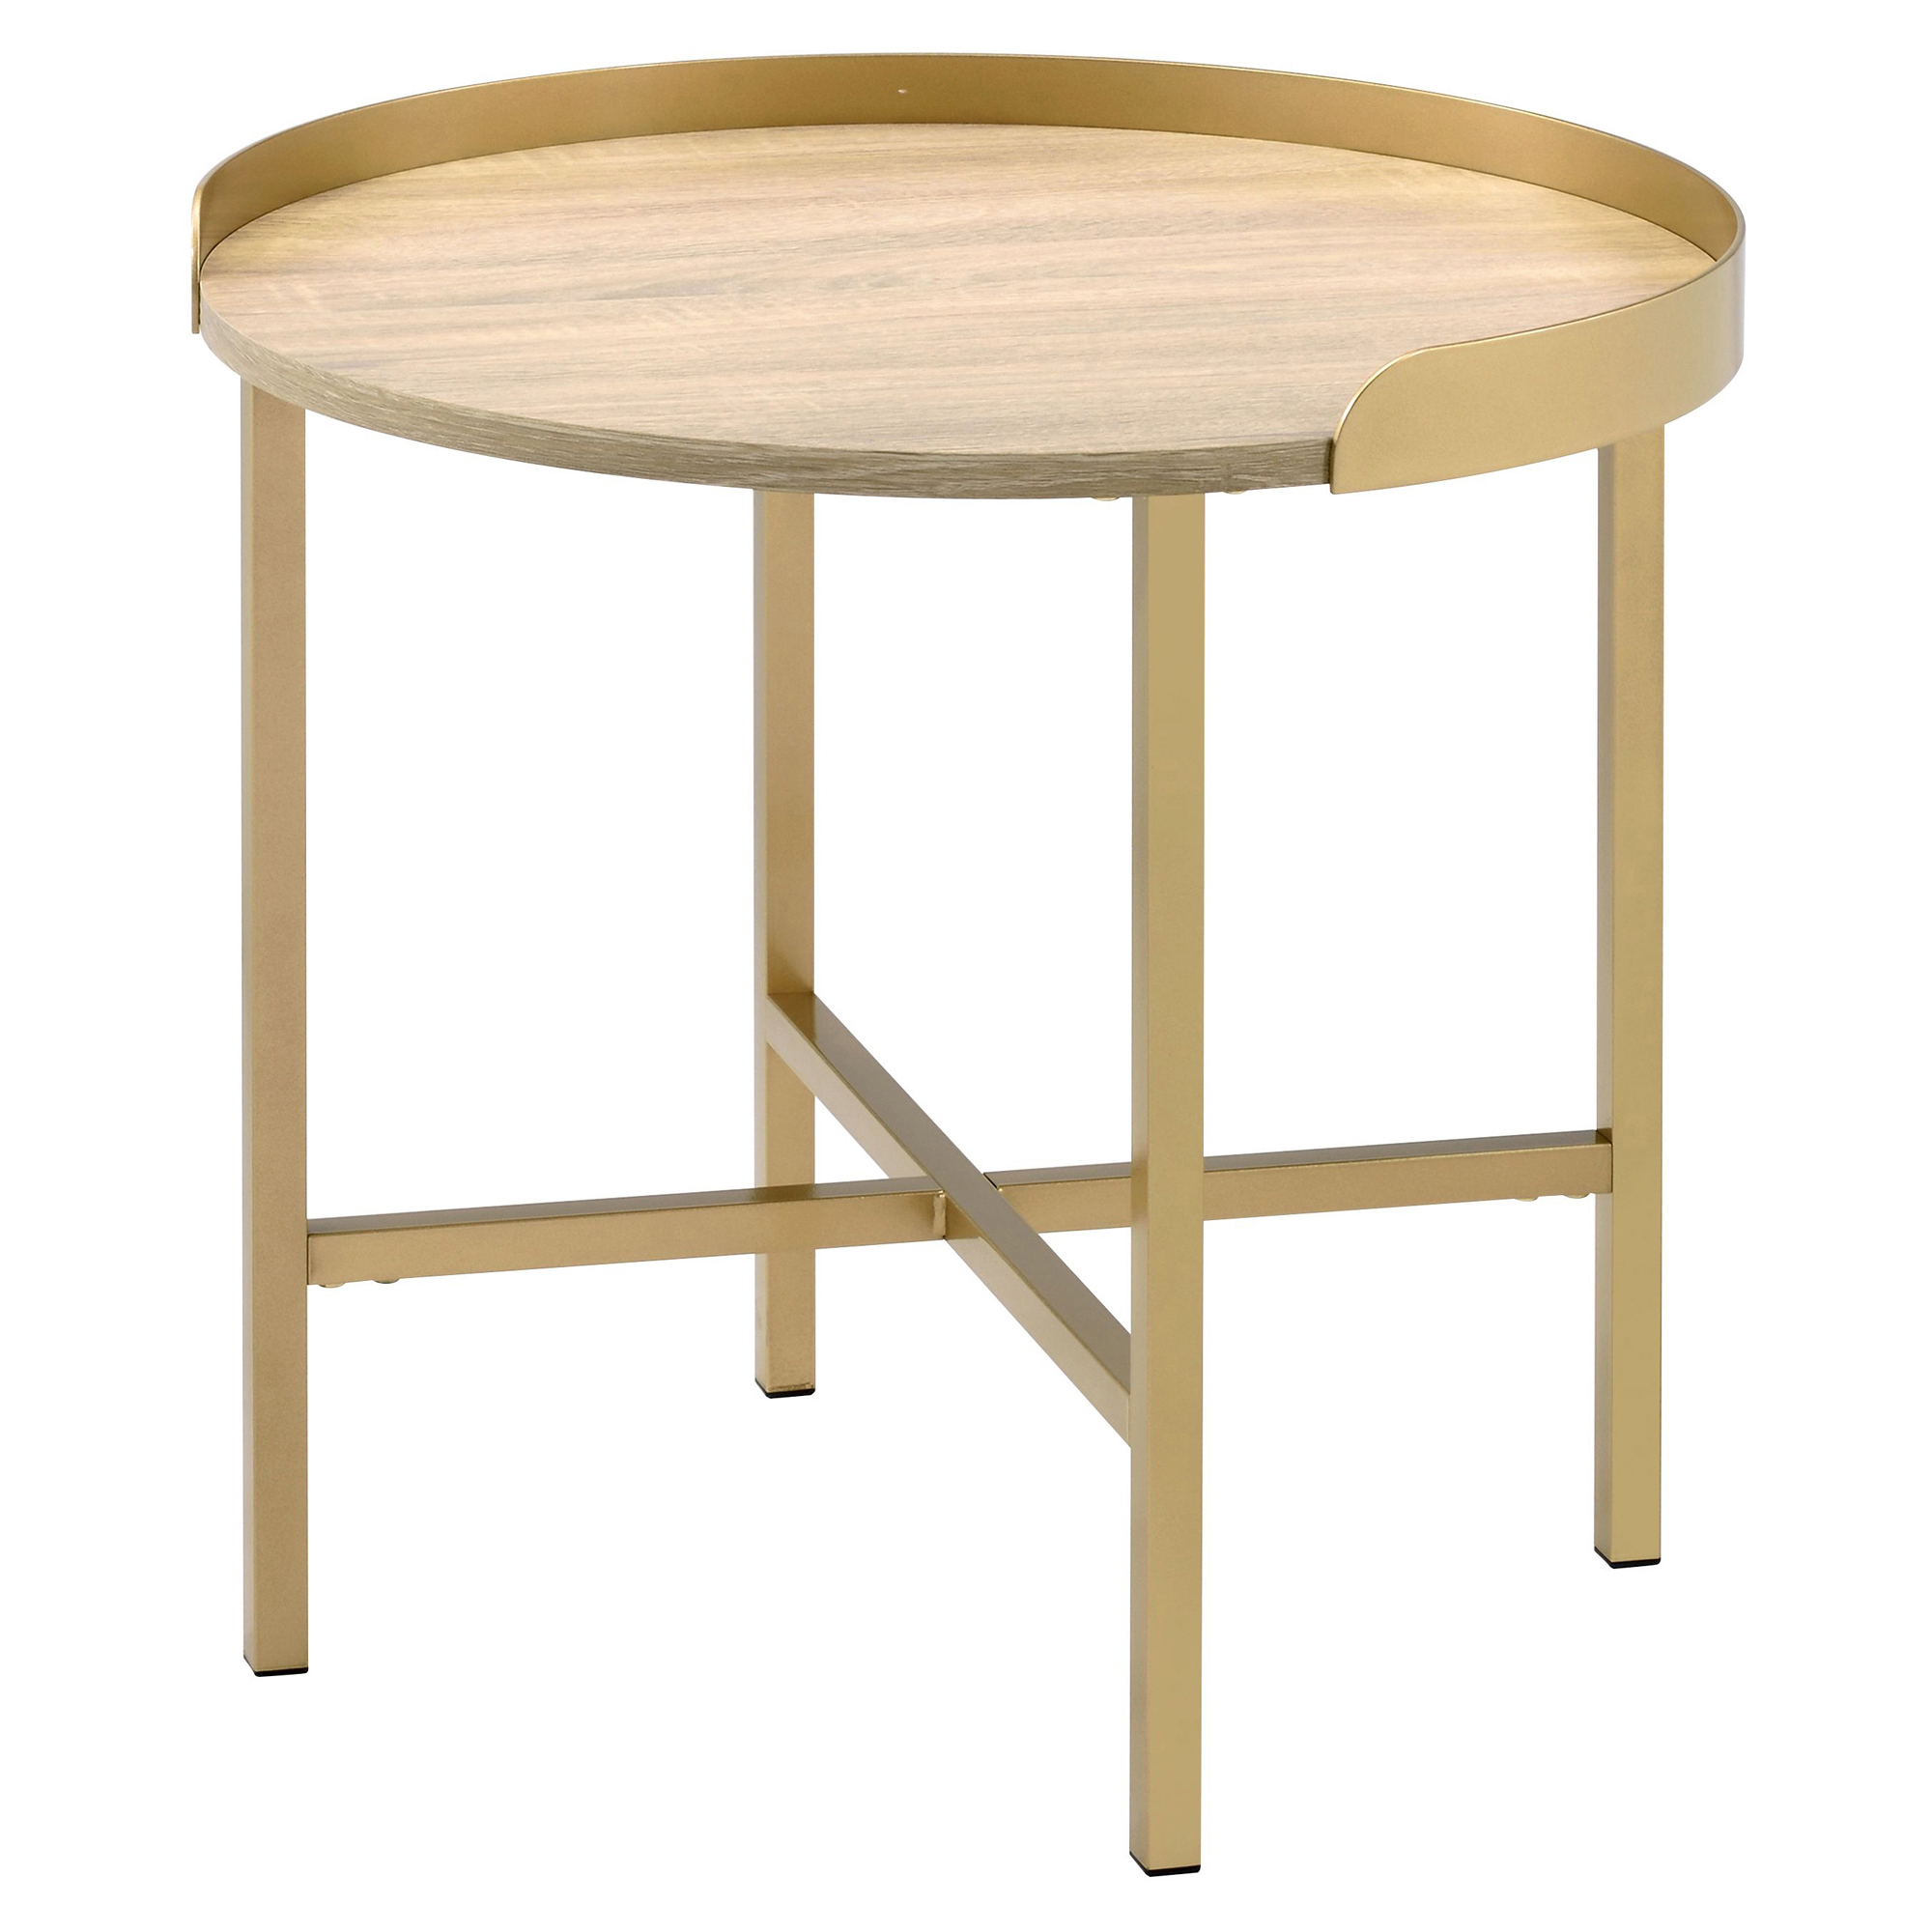 ACME Mithea Round End Table in Oak and Gold - image 1 of 5